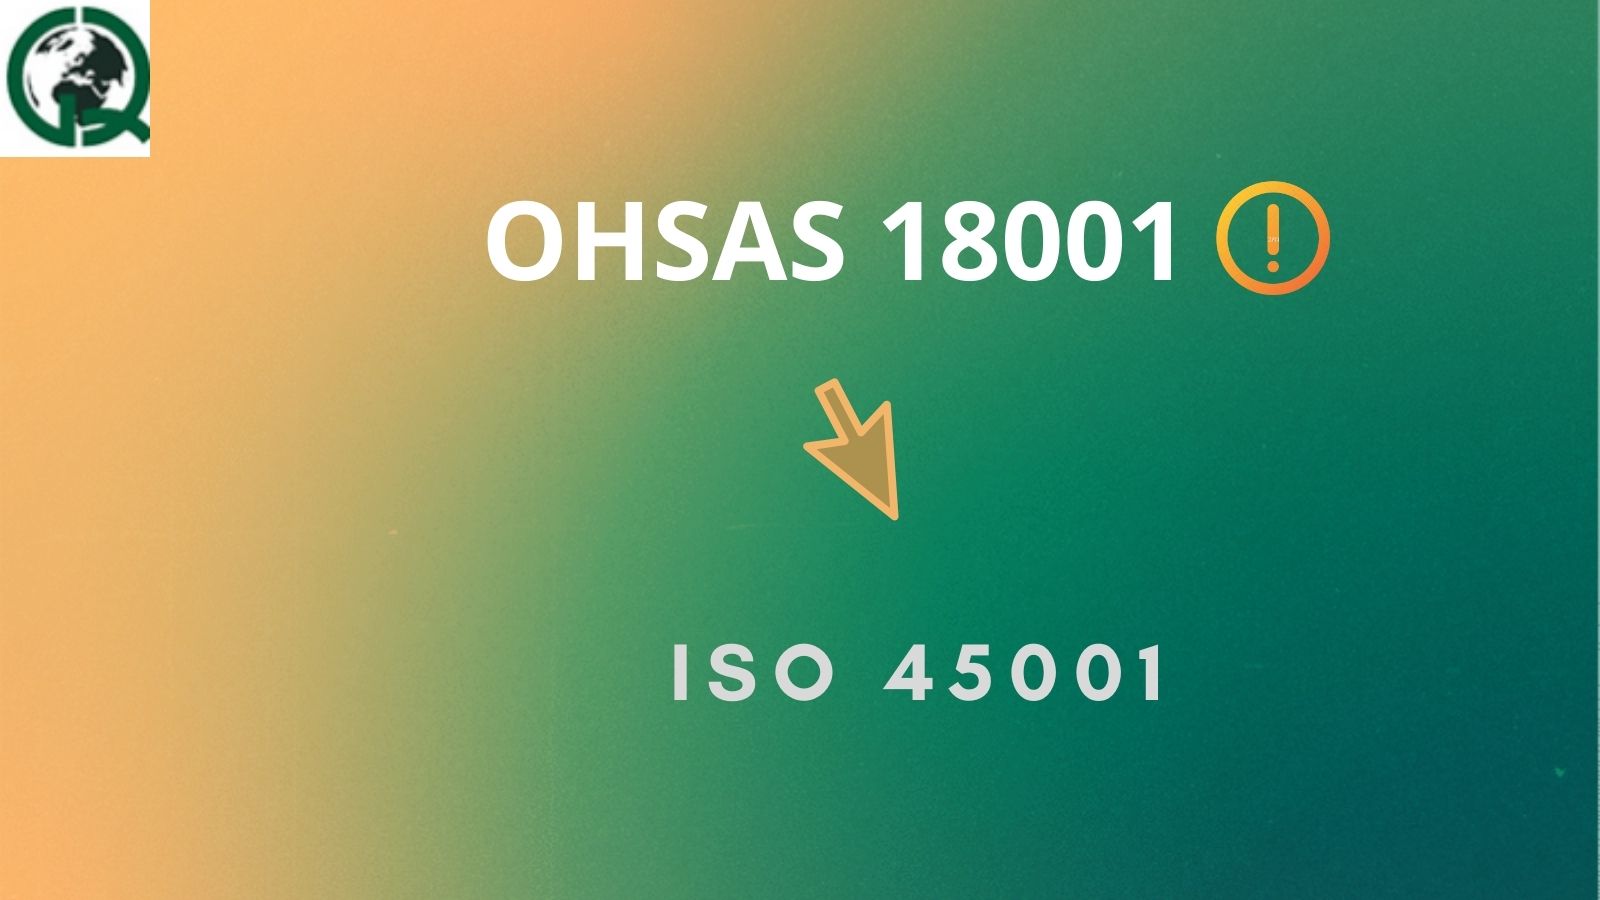 OHSAS 18001 has Been Replaced by ISO 45001